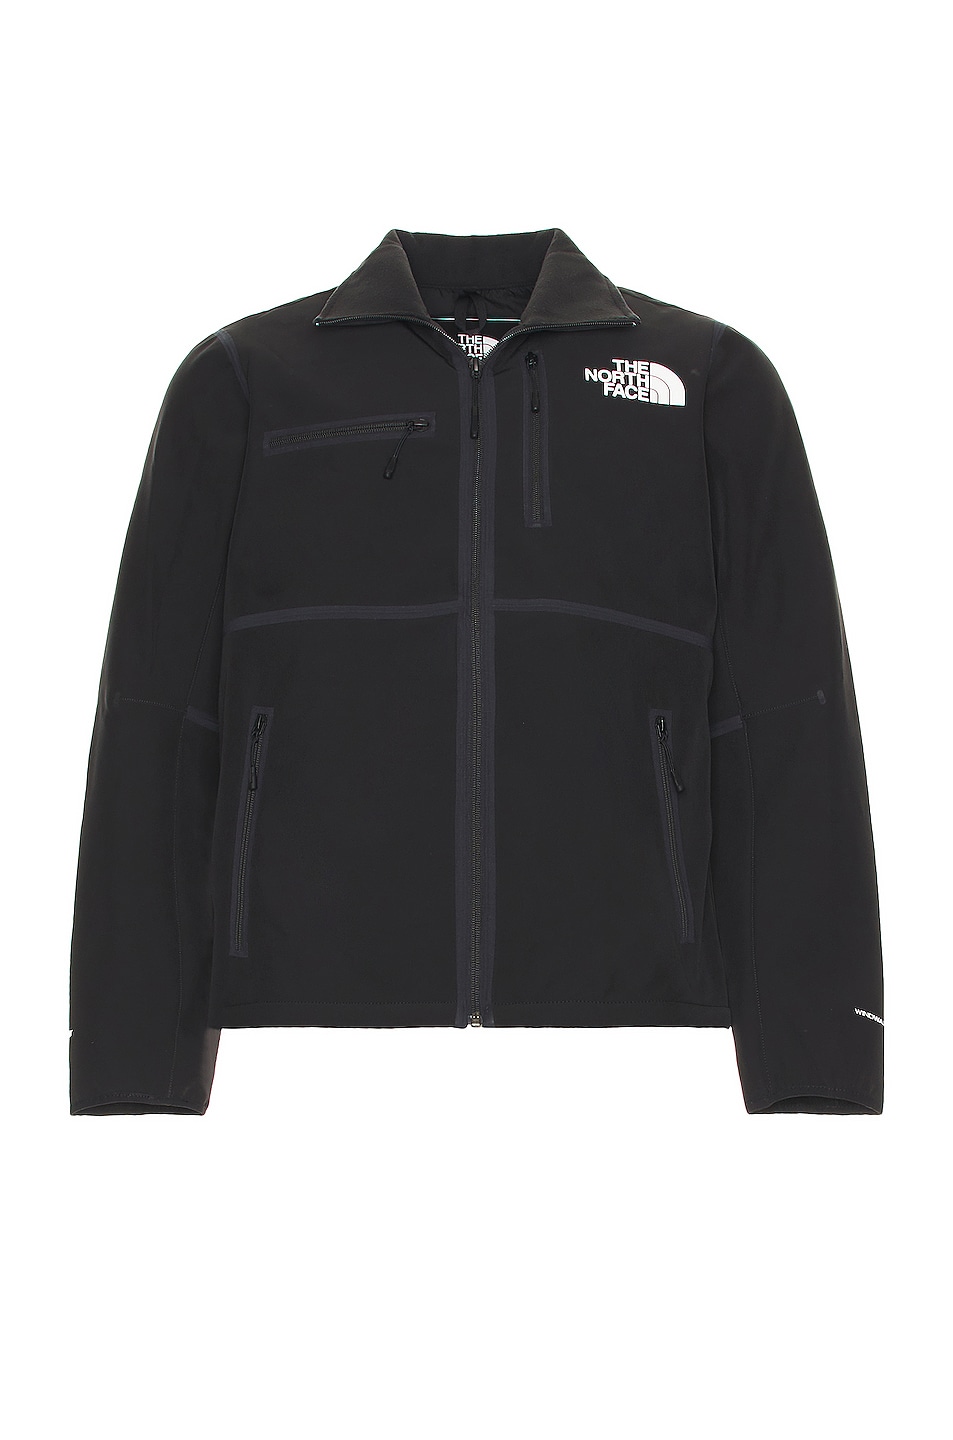 Image 1 of The North Face Rmst Denali Jacket in Tnf Black